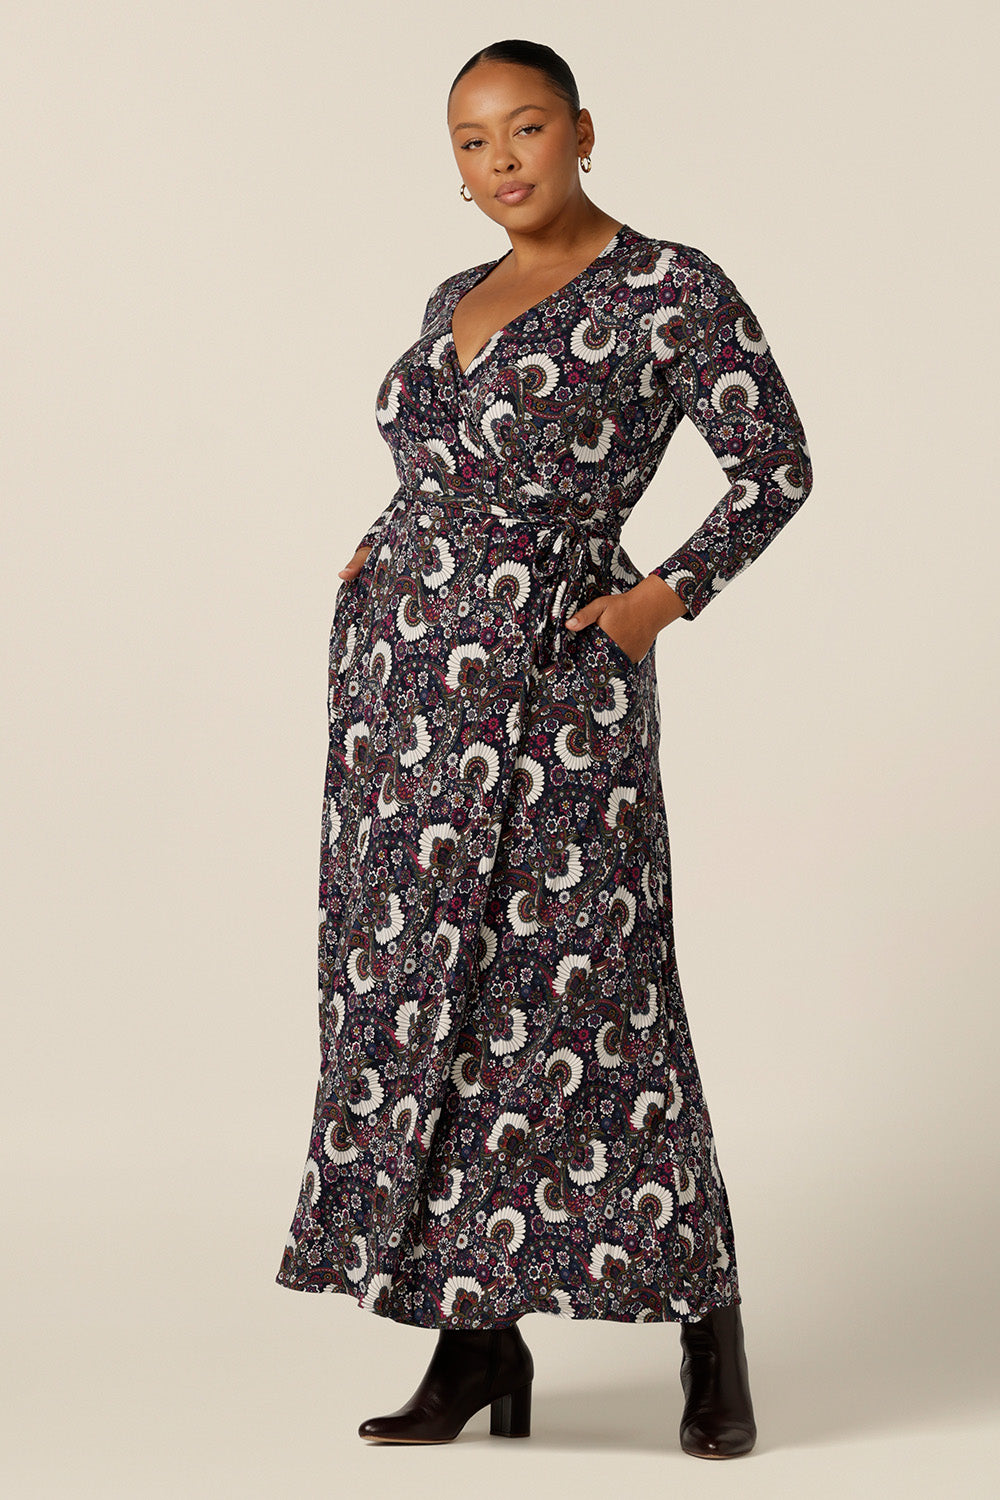 A great maxi dress for women looking for 40 plus fashion, the Kimberley maxi dress has long sleeves , pockets and V-neck. This full-length, wrap dress come in paisley print jersey and is available to shop in sizes 8 to 24.